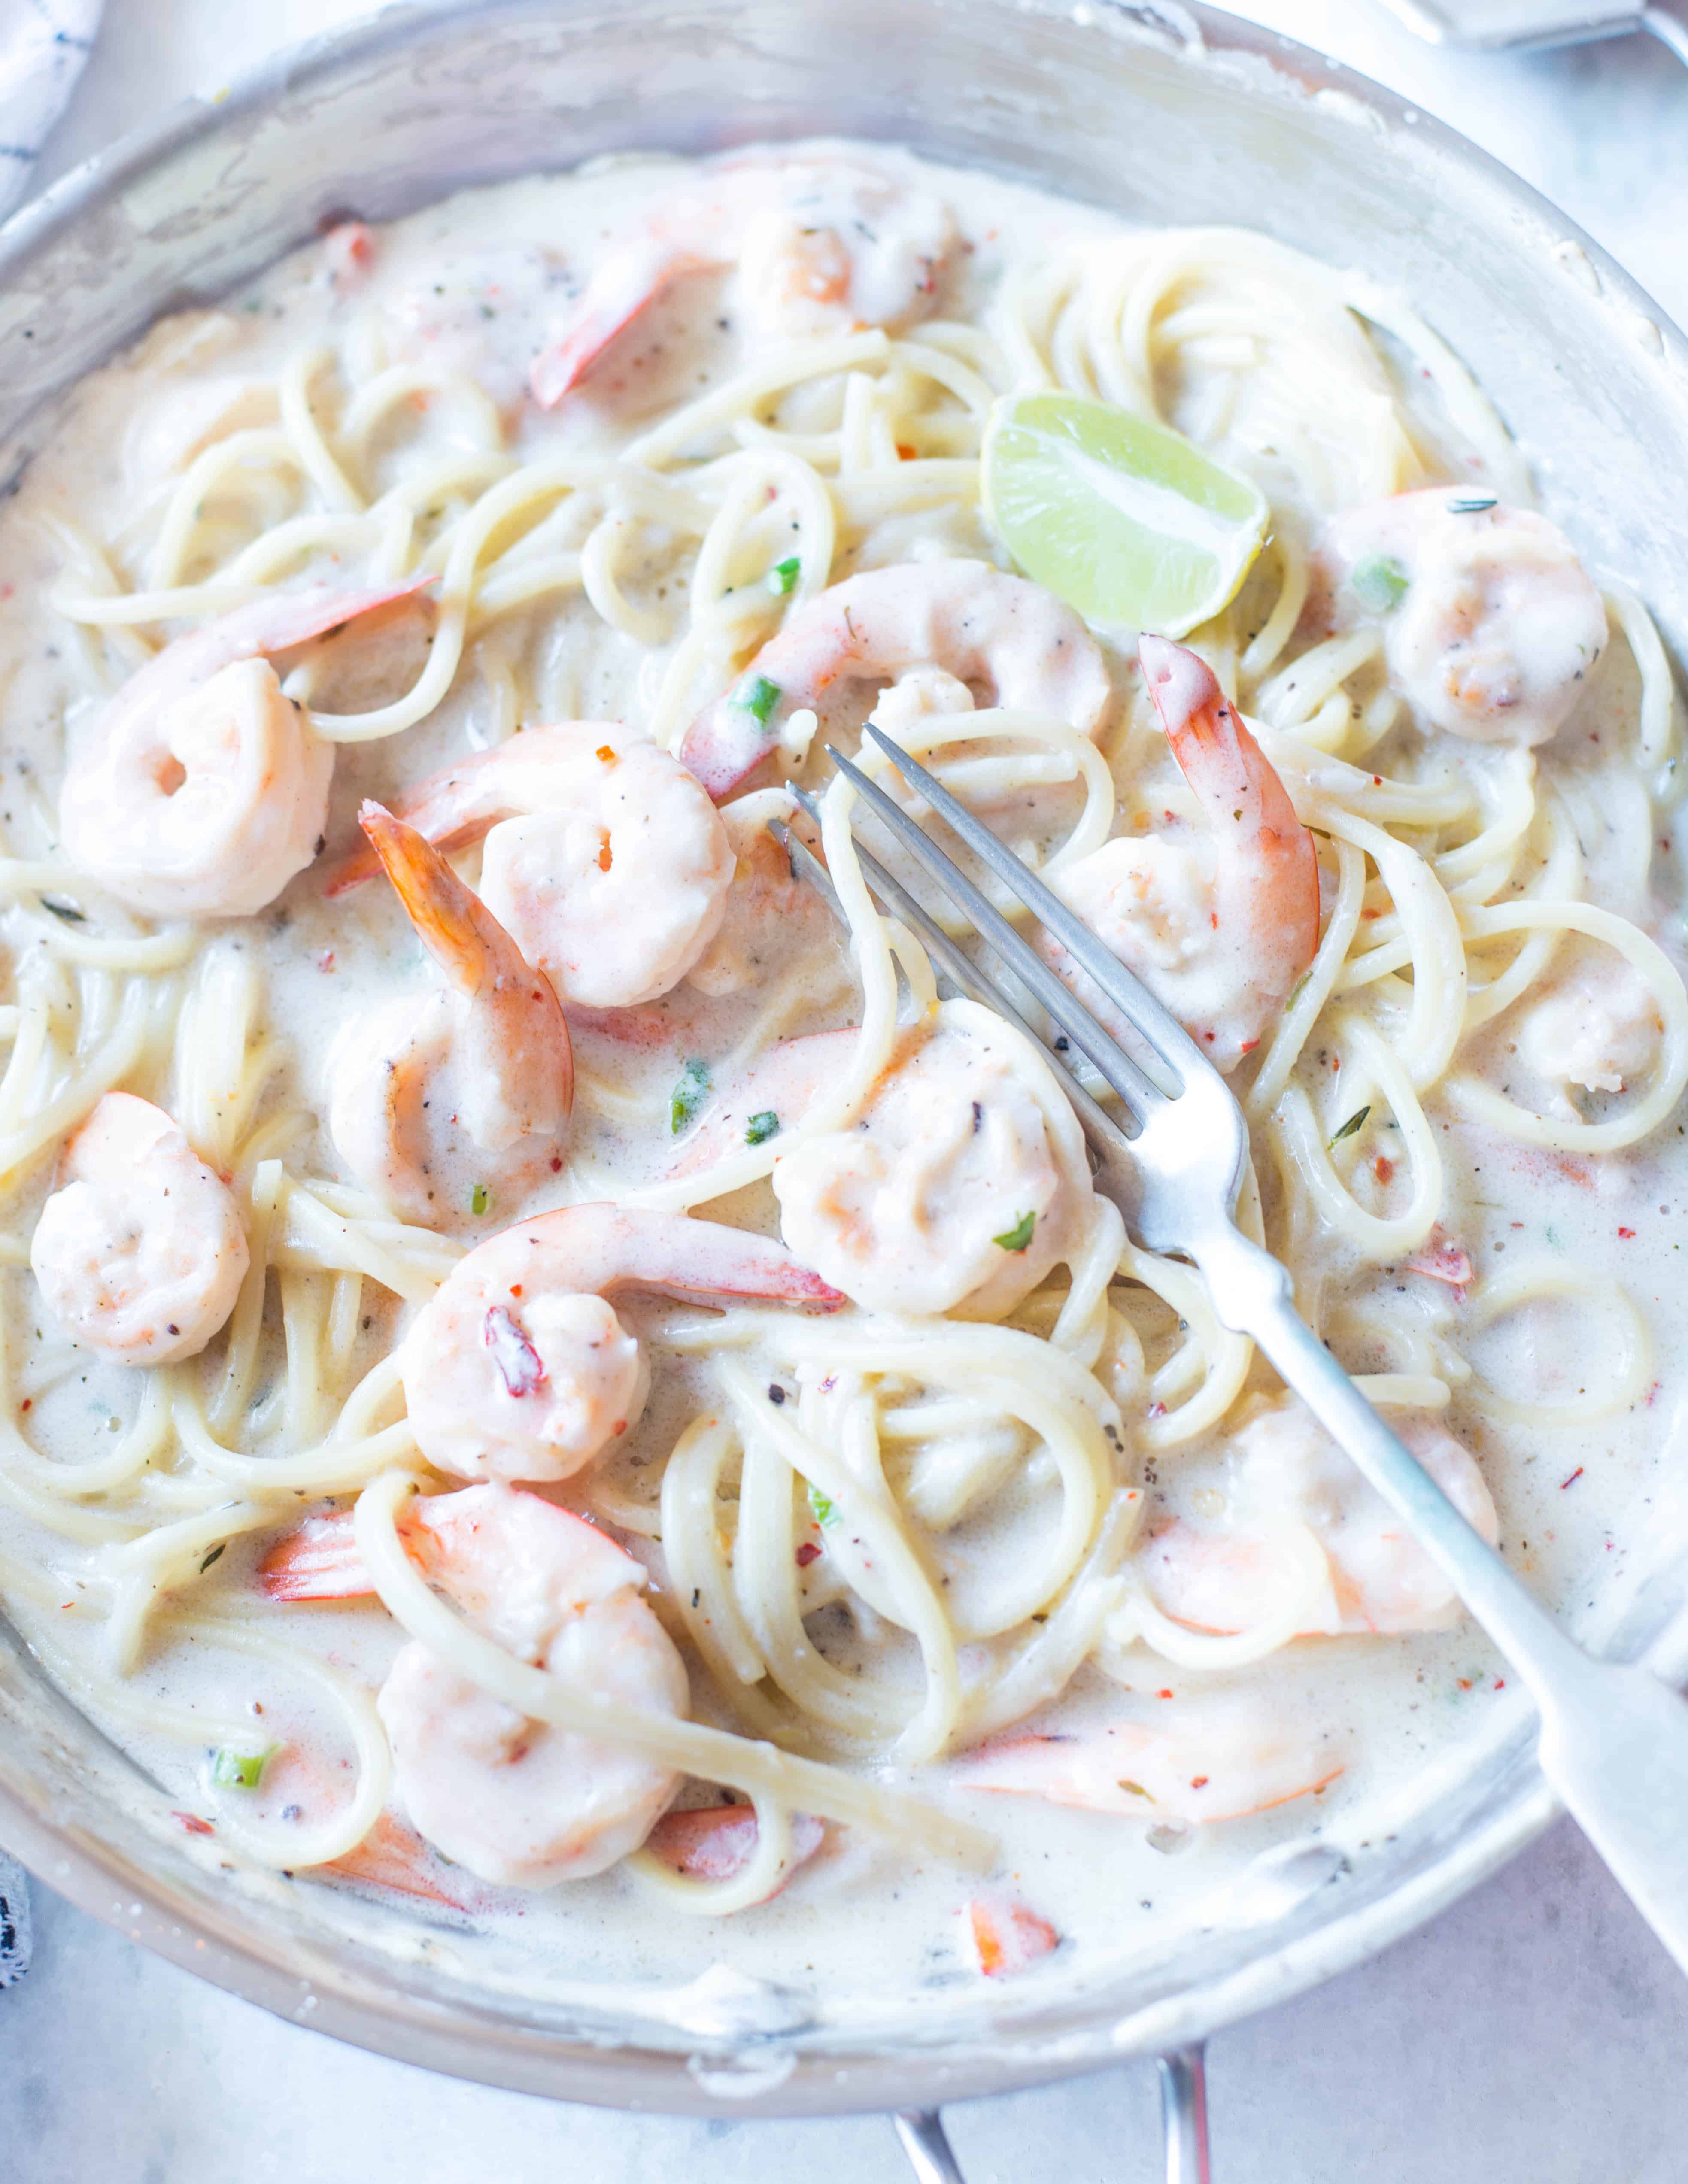 Easy and quick Lemon Garlic Shrimp ready in flat 20 minutes. Toss in your favourite pasta and your Creamy Lemon Garlic Shrimp Pasta is on the table in no time.